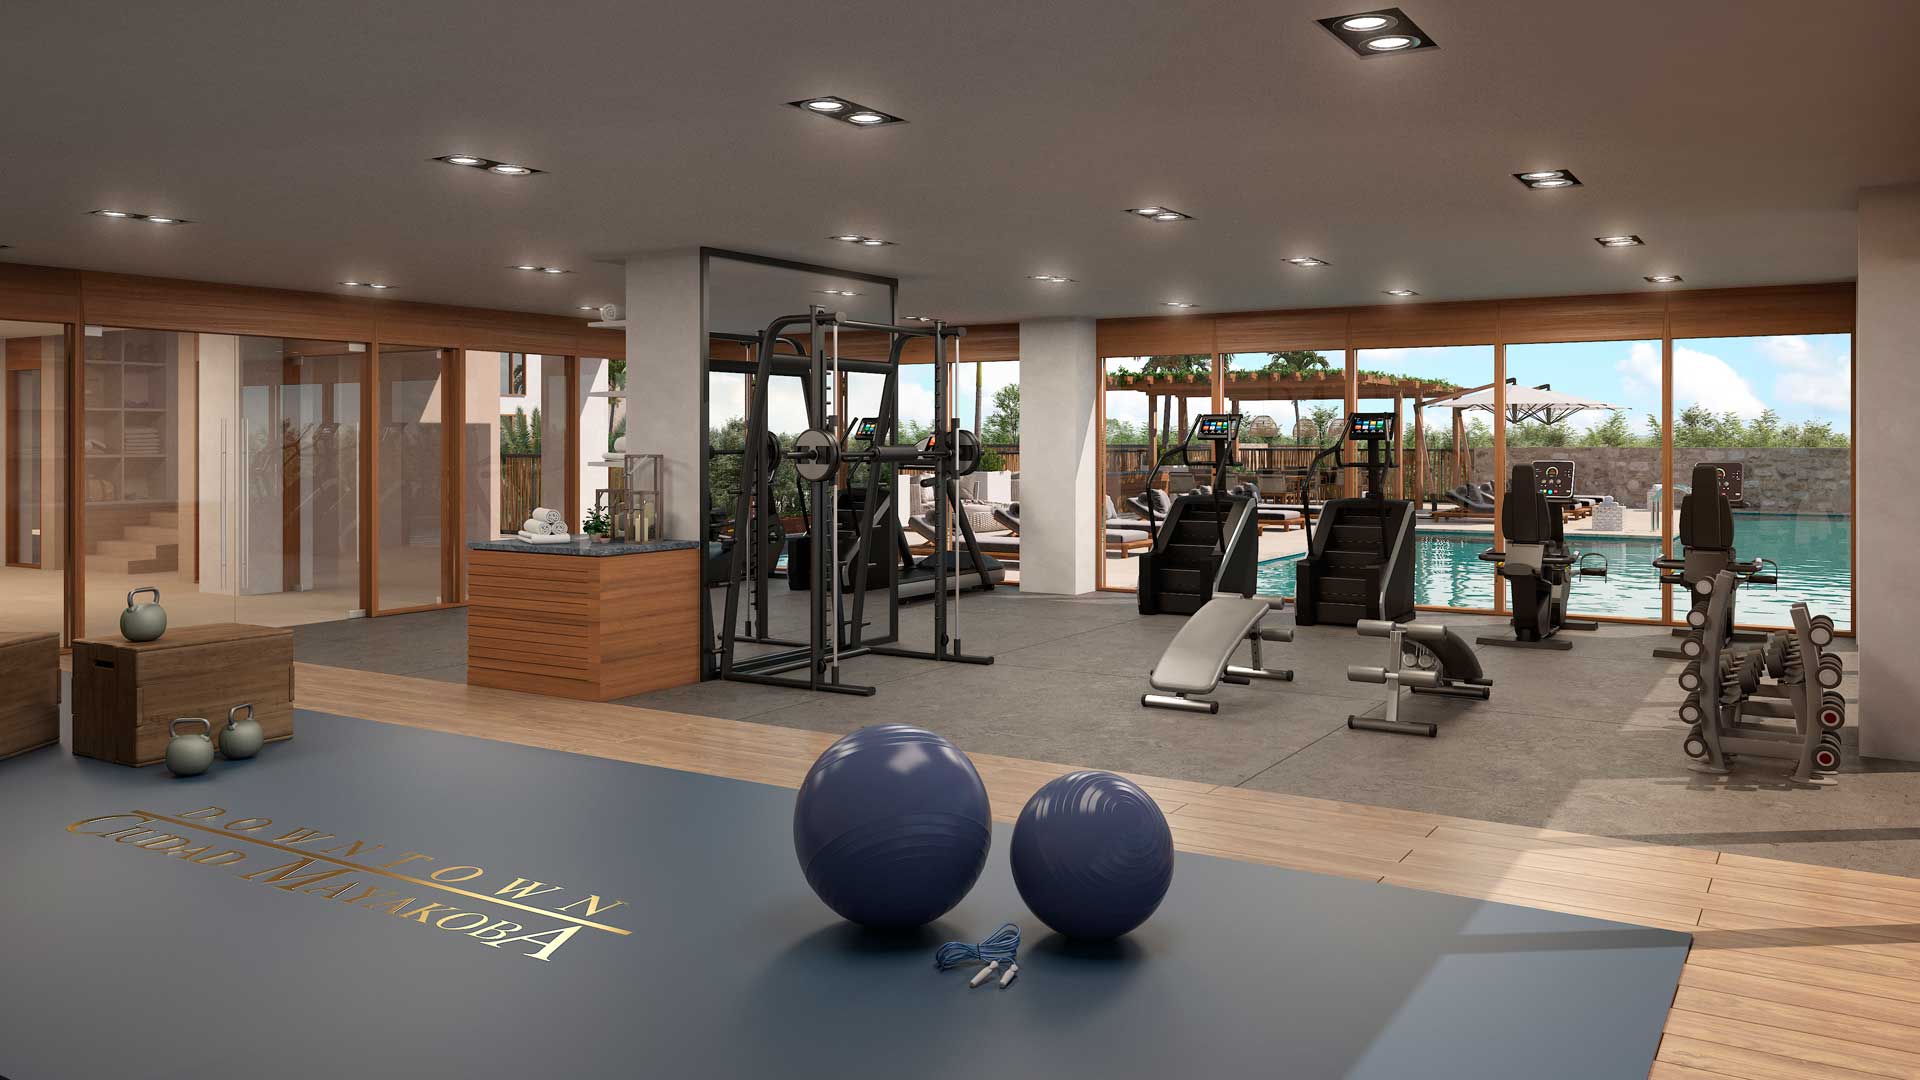 h playa del carmen lofts and condos for sale 045 gym